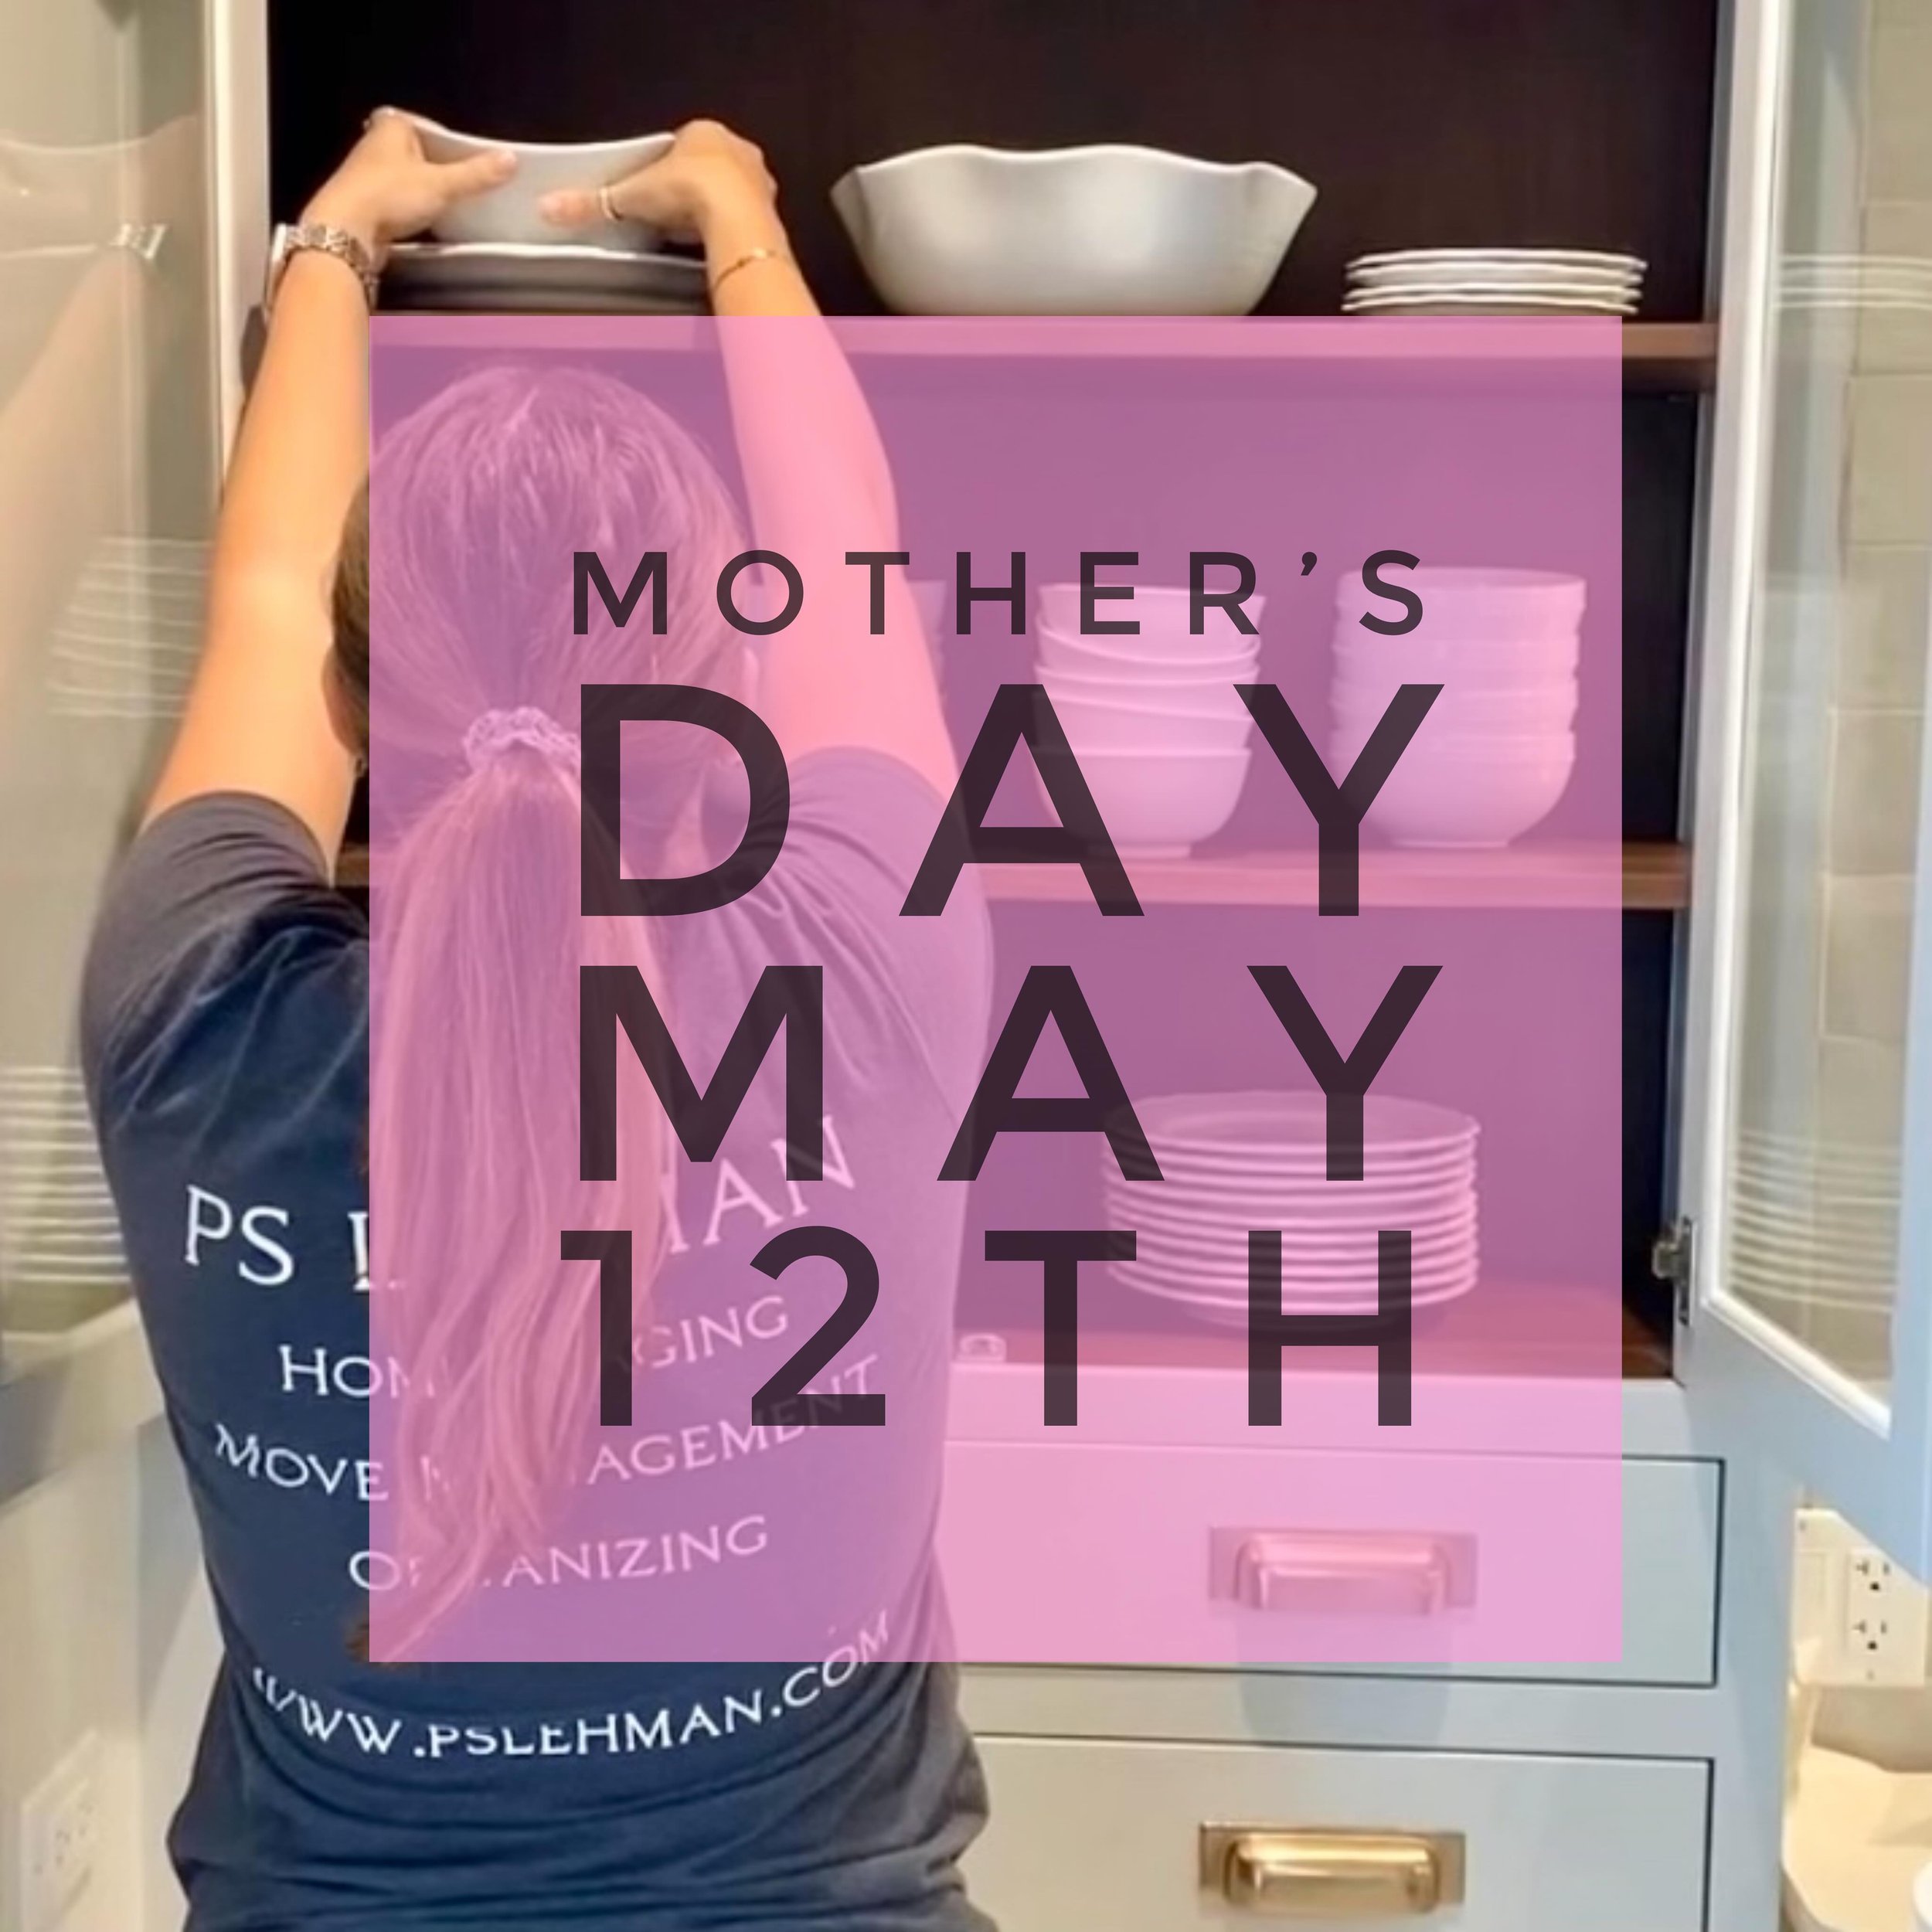 We have gift certificates for Mom, Grandma, or any special lady you want to celebrate Sunday, May 12th! Purchase a certificate for any amount and she can choose the services she wants. #pslehman #professionalorganizingservices #mothersdaygiftideas